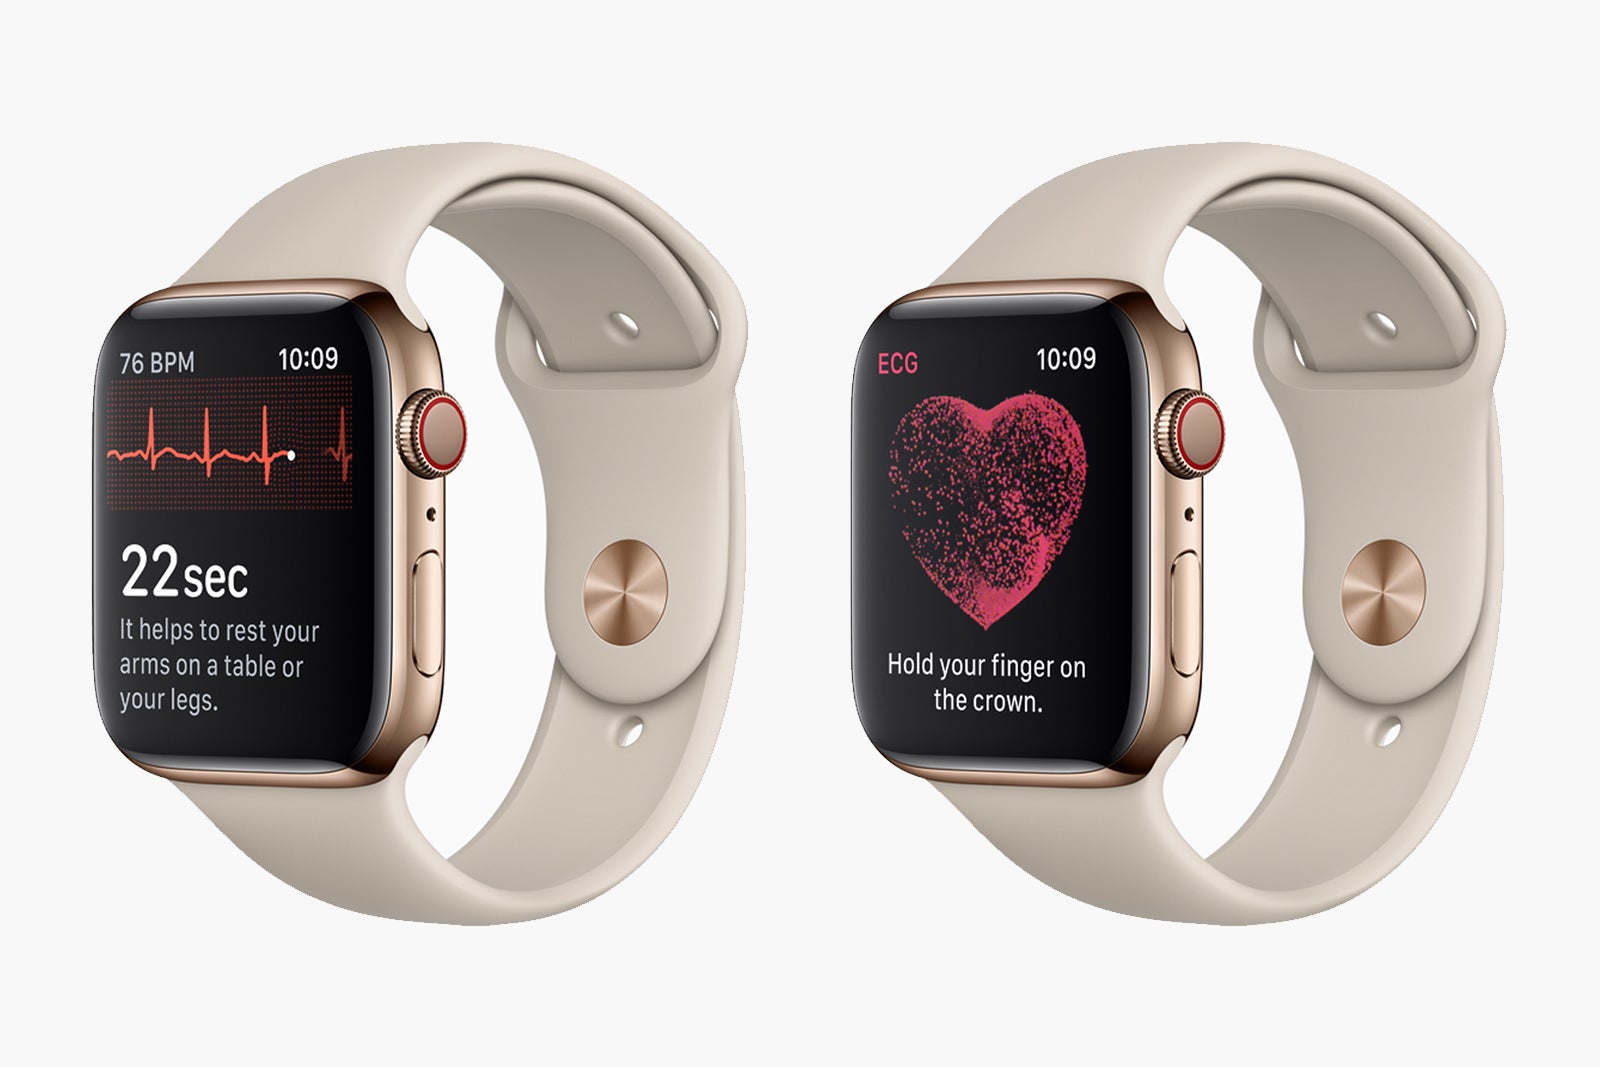 Apple Watch Series 5 rumor review: price, release date, and new features